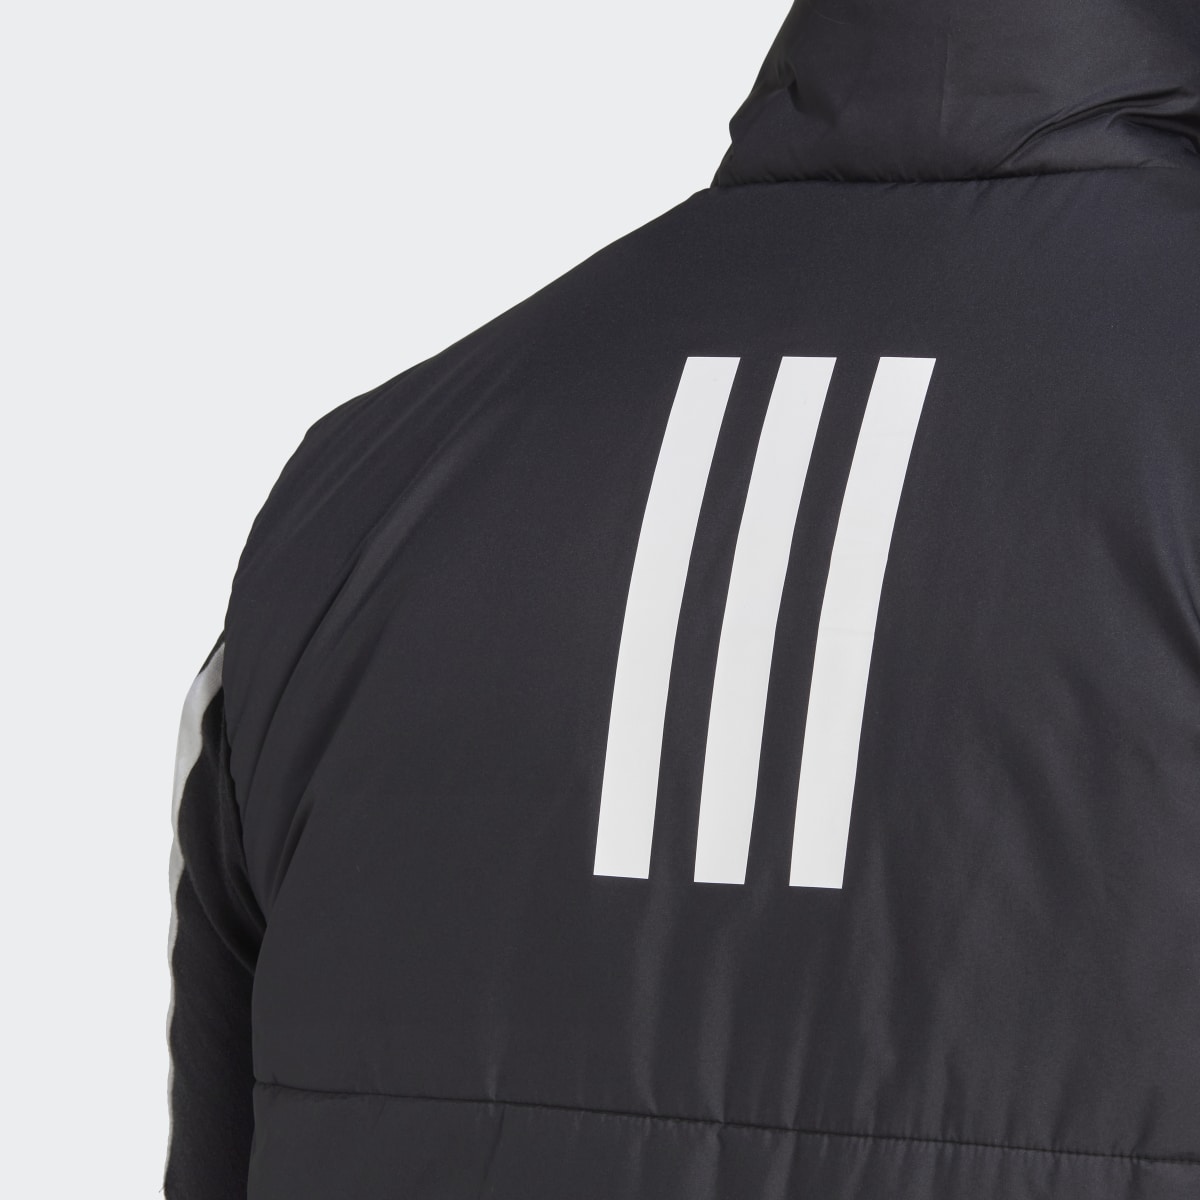 Adidas 3-Stripes Insulated Vest. 8